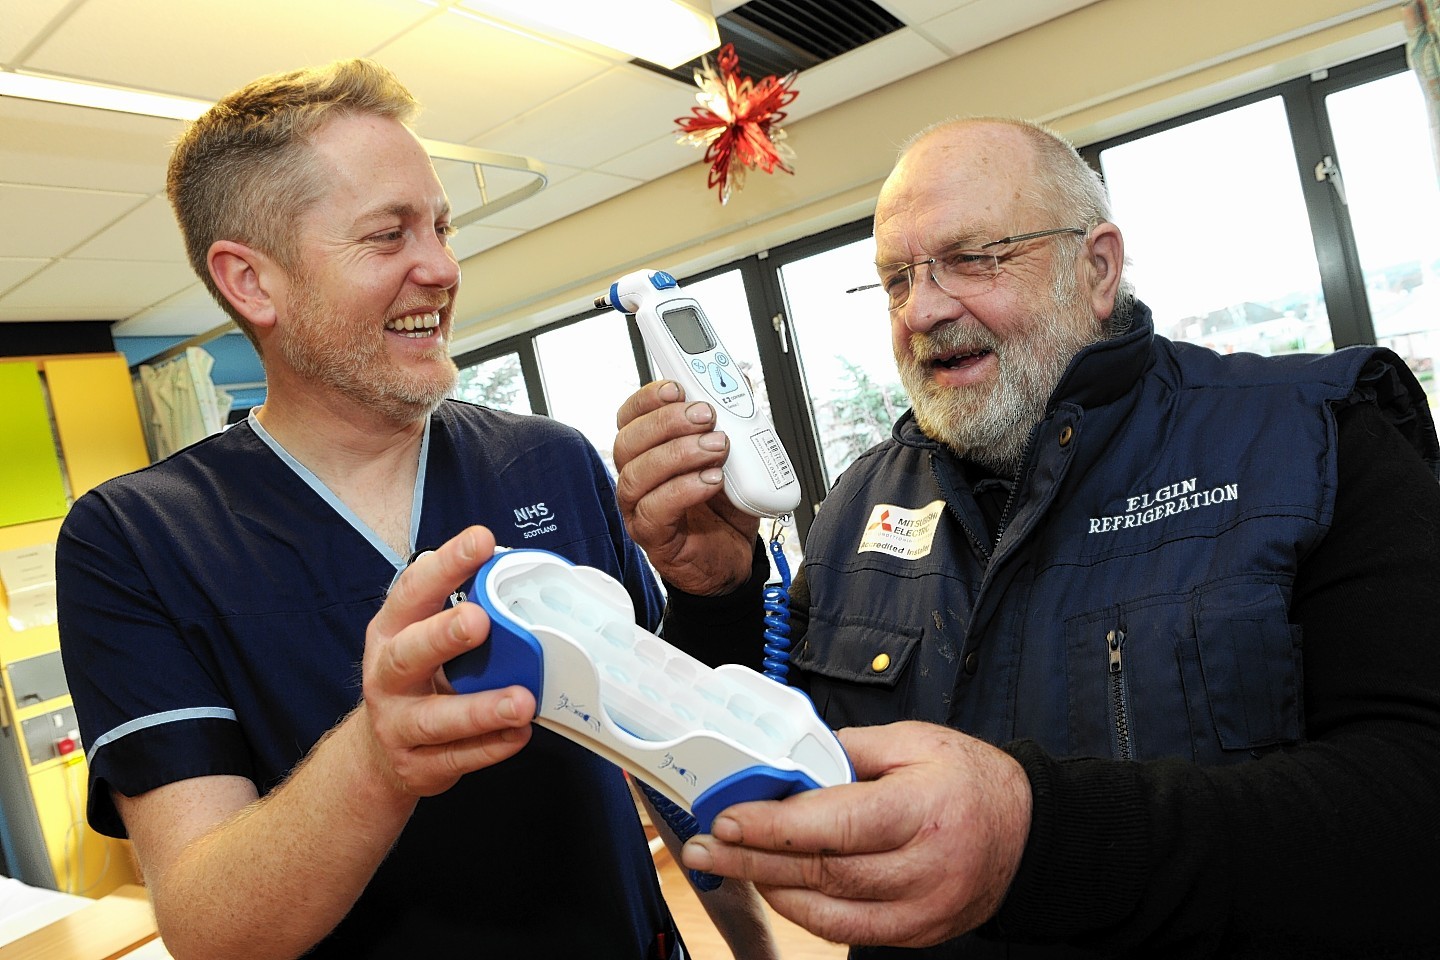 Elgin charity man bounces back to boost hospital